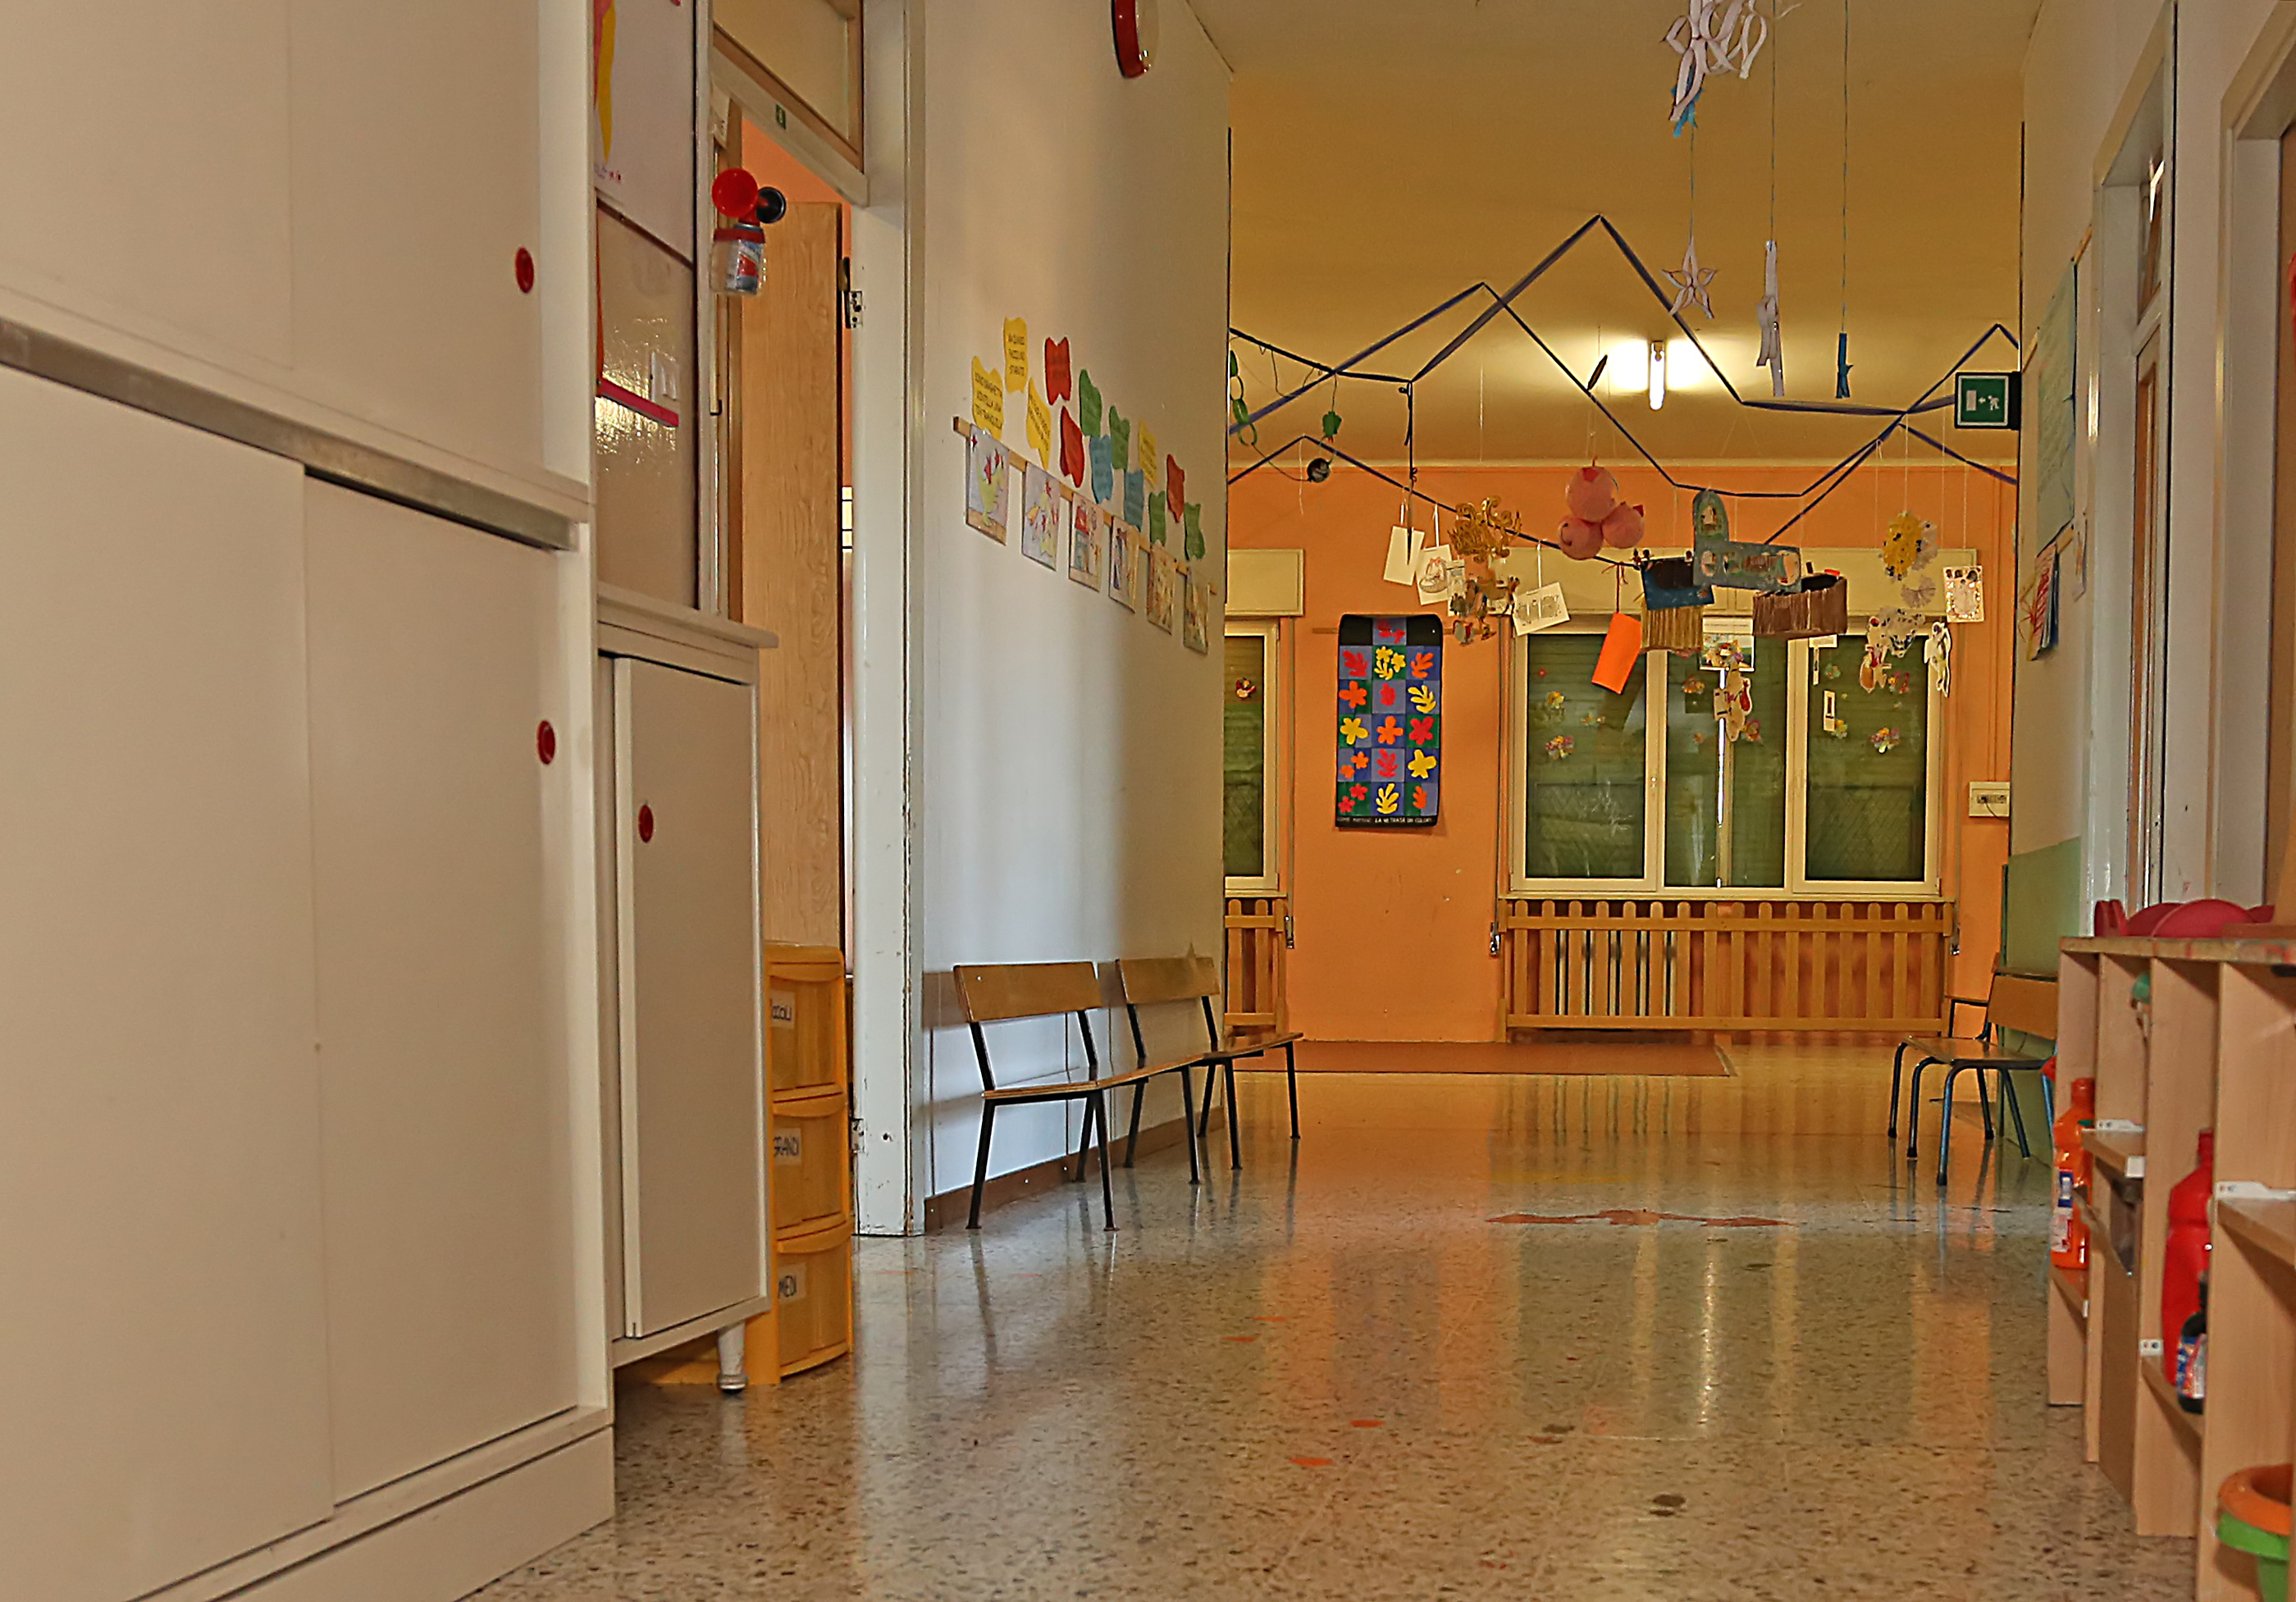 long corridor of a nursery with the decorations hung on walls